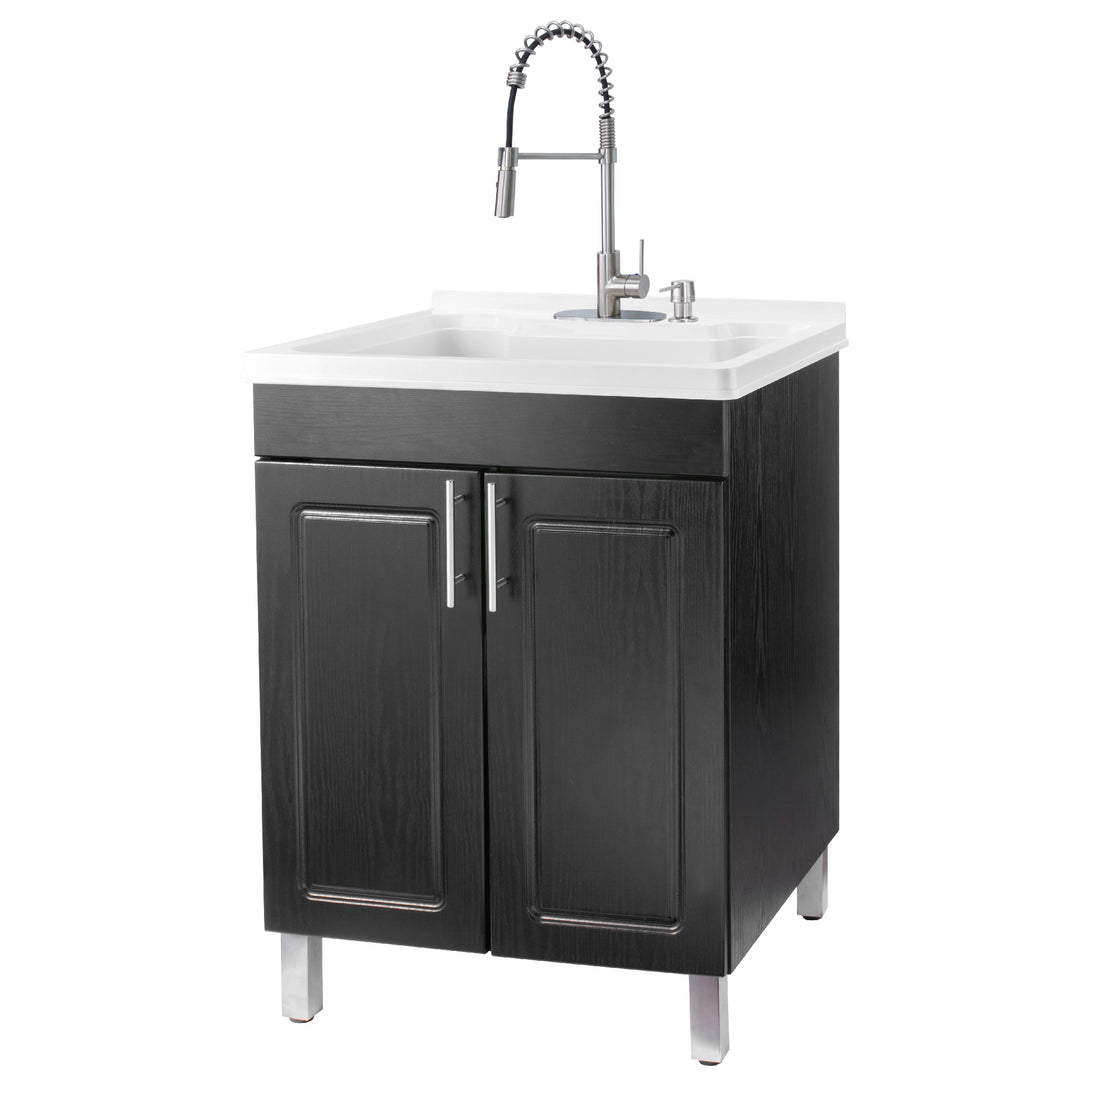 Tehila Black Vanity Cabinet and White Utility Sink with Stainless Steel Finish High-Arc Coil Pull-Down Faucet - Utility sinks vanites Tehila